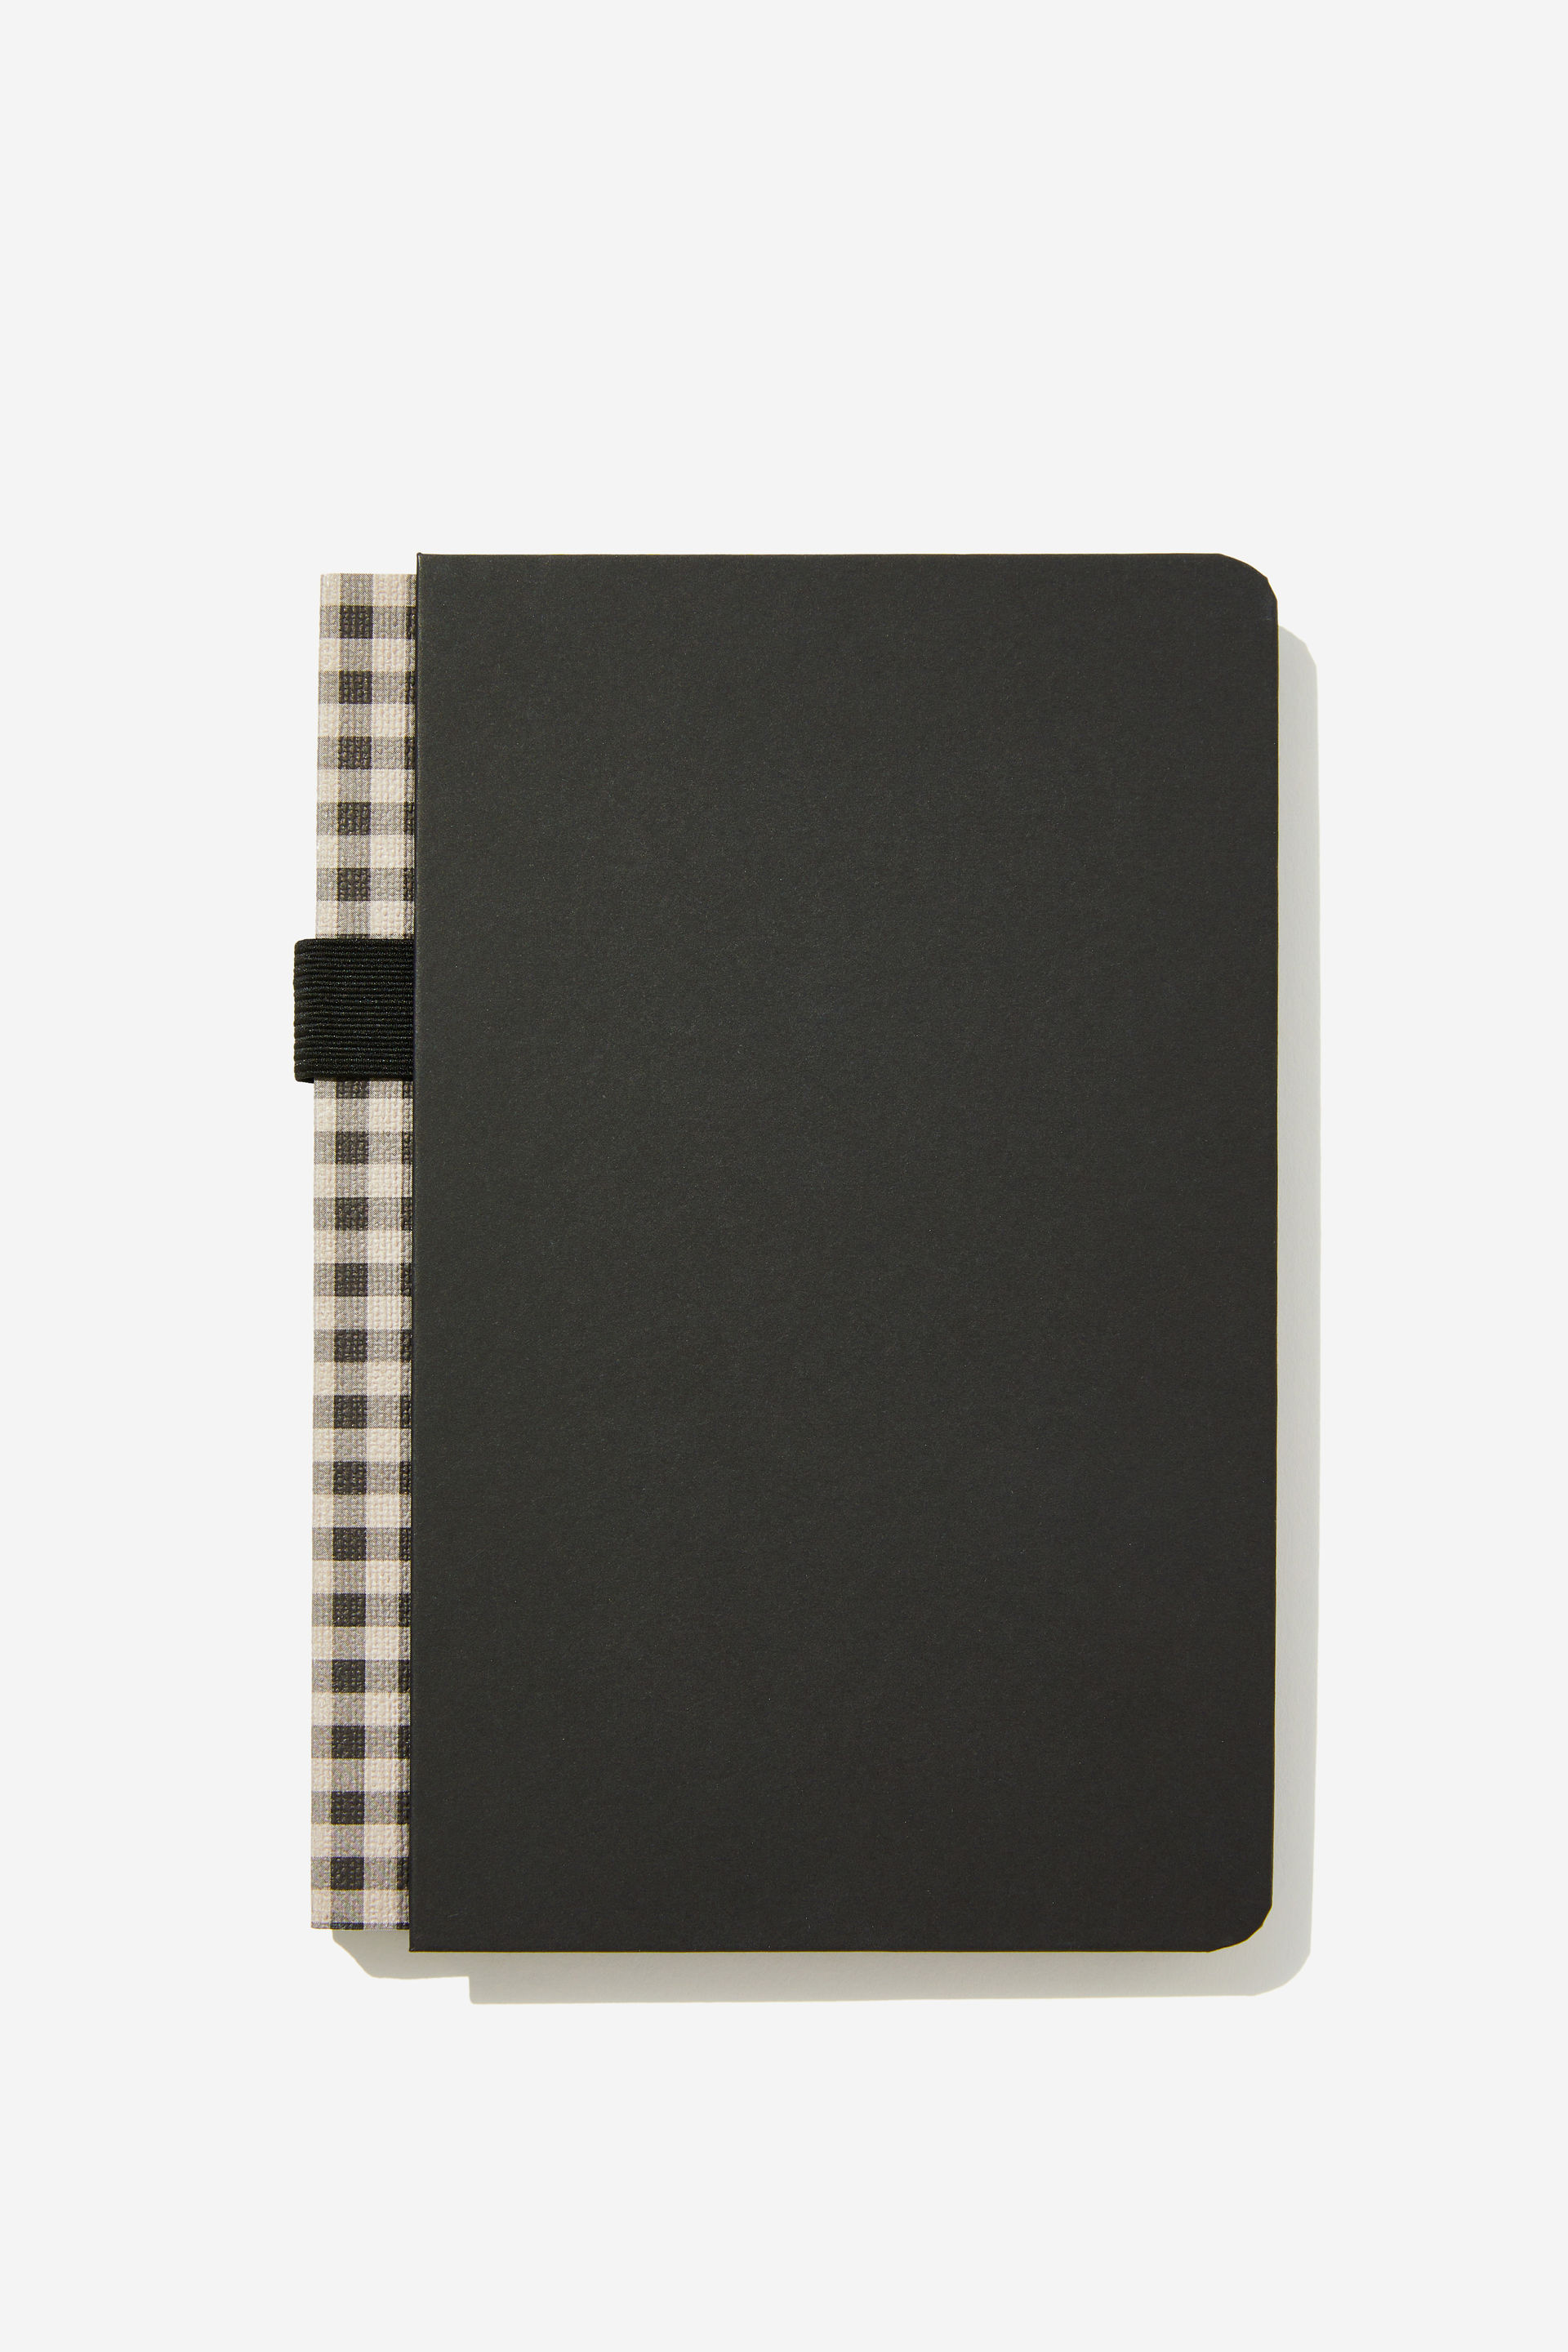 Typo - A5 Parker Notebook - Black gingham